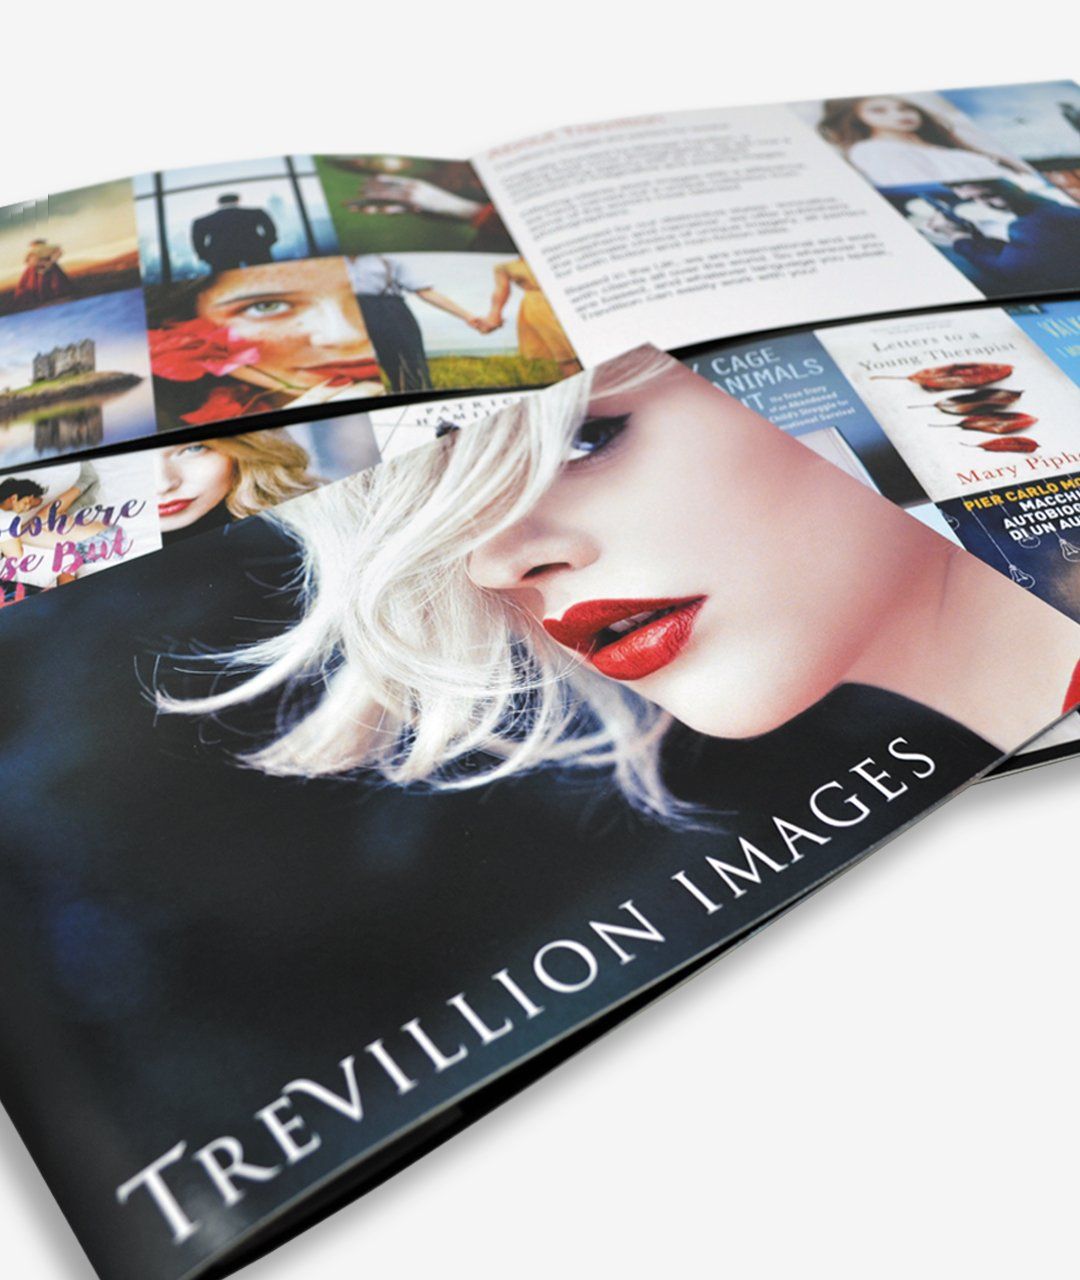 WE PRINT FLYERS, LEAFLETS, FOLDED LEAFLETS, POSTERS, STICKERS, BUSINESS CARDS, RECYCLED, KRAFT, LETTERHEADS, COMPLIMENT SLIPS, GREETING CARDS, POSTCARDS, T SHIRTS, GICLEE, FINE ART, STATIONERY, TABLE TALKERS, CALENDARS, SIGNAGE & MORE. BRIGHTON, HOVE, LONDON & BEYOND.